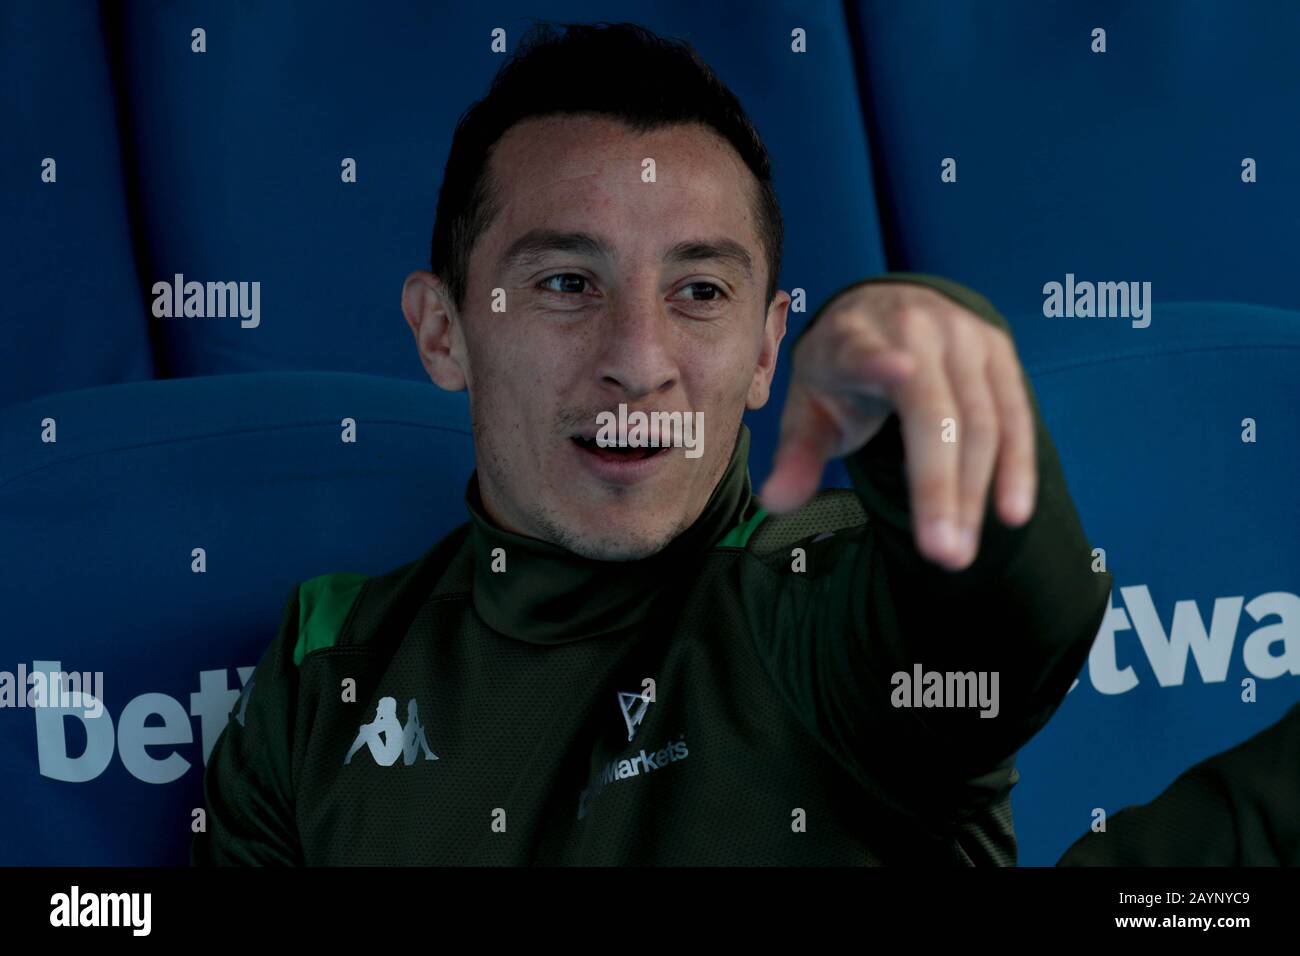 Leganes, Spain. 16th Feb, 2020. Soccer match 24 La Liga, Leganes against Betis held at the Butrarque Stadium in Leganes, Madrid. Andres Guardado Betis player mexican. Final score 0-0 Photo: Juan Carlos Rojas/Picture Alliance | usage worldwide Credit: dpa picture alliance/Alamy Live News Stock Photo